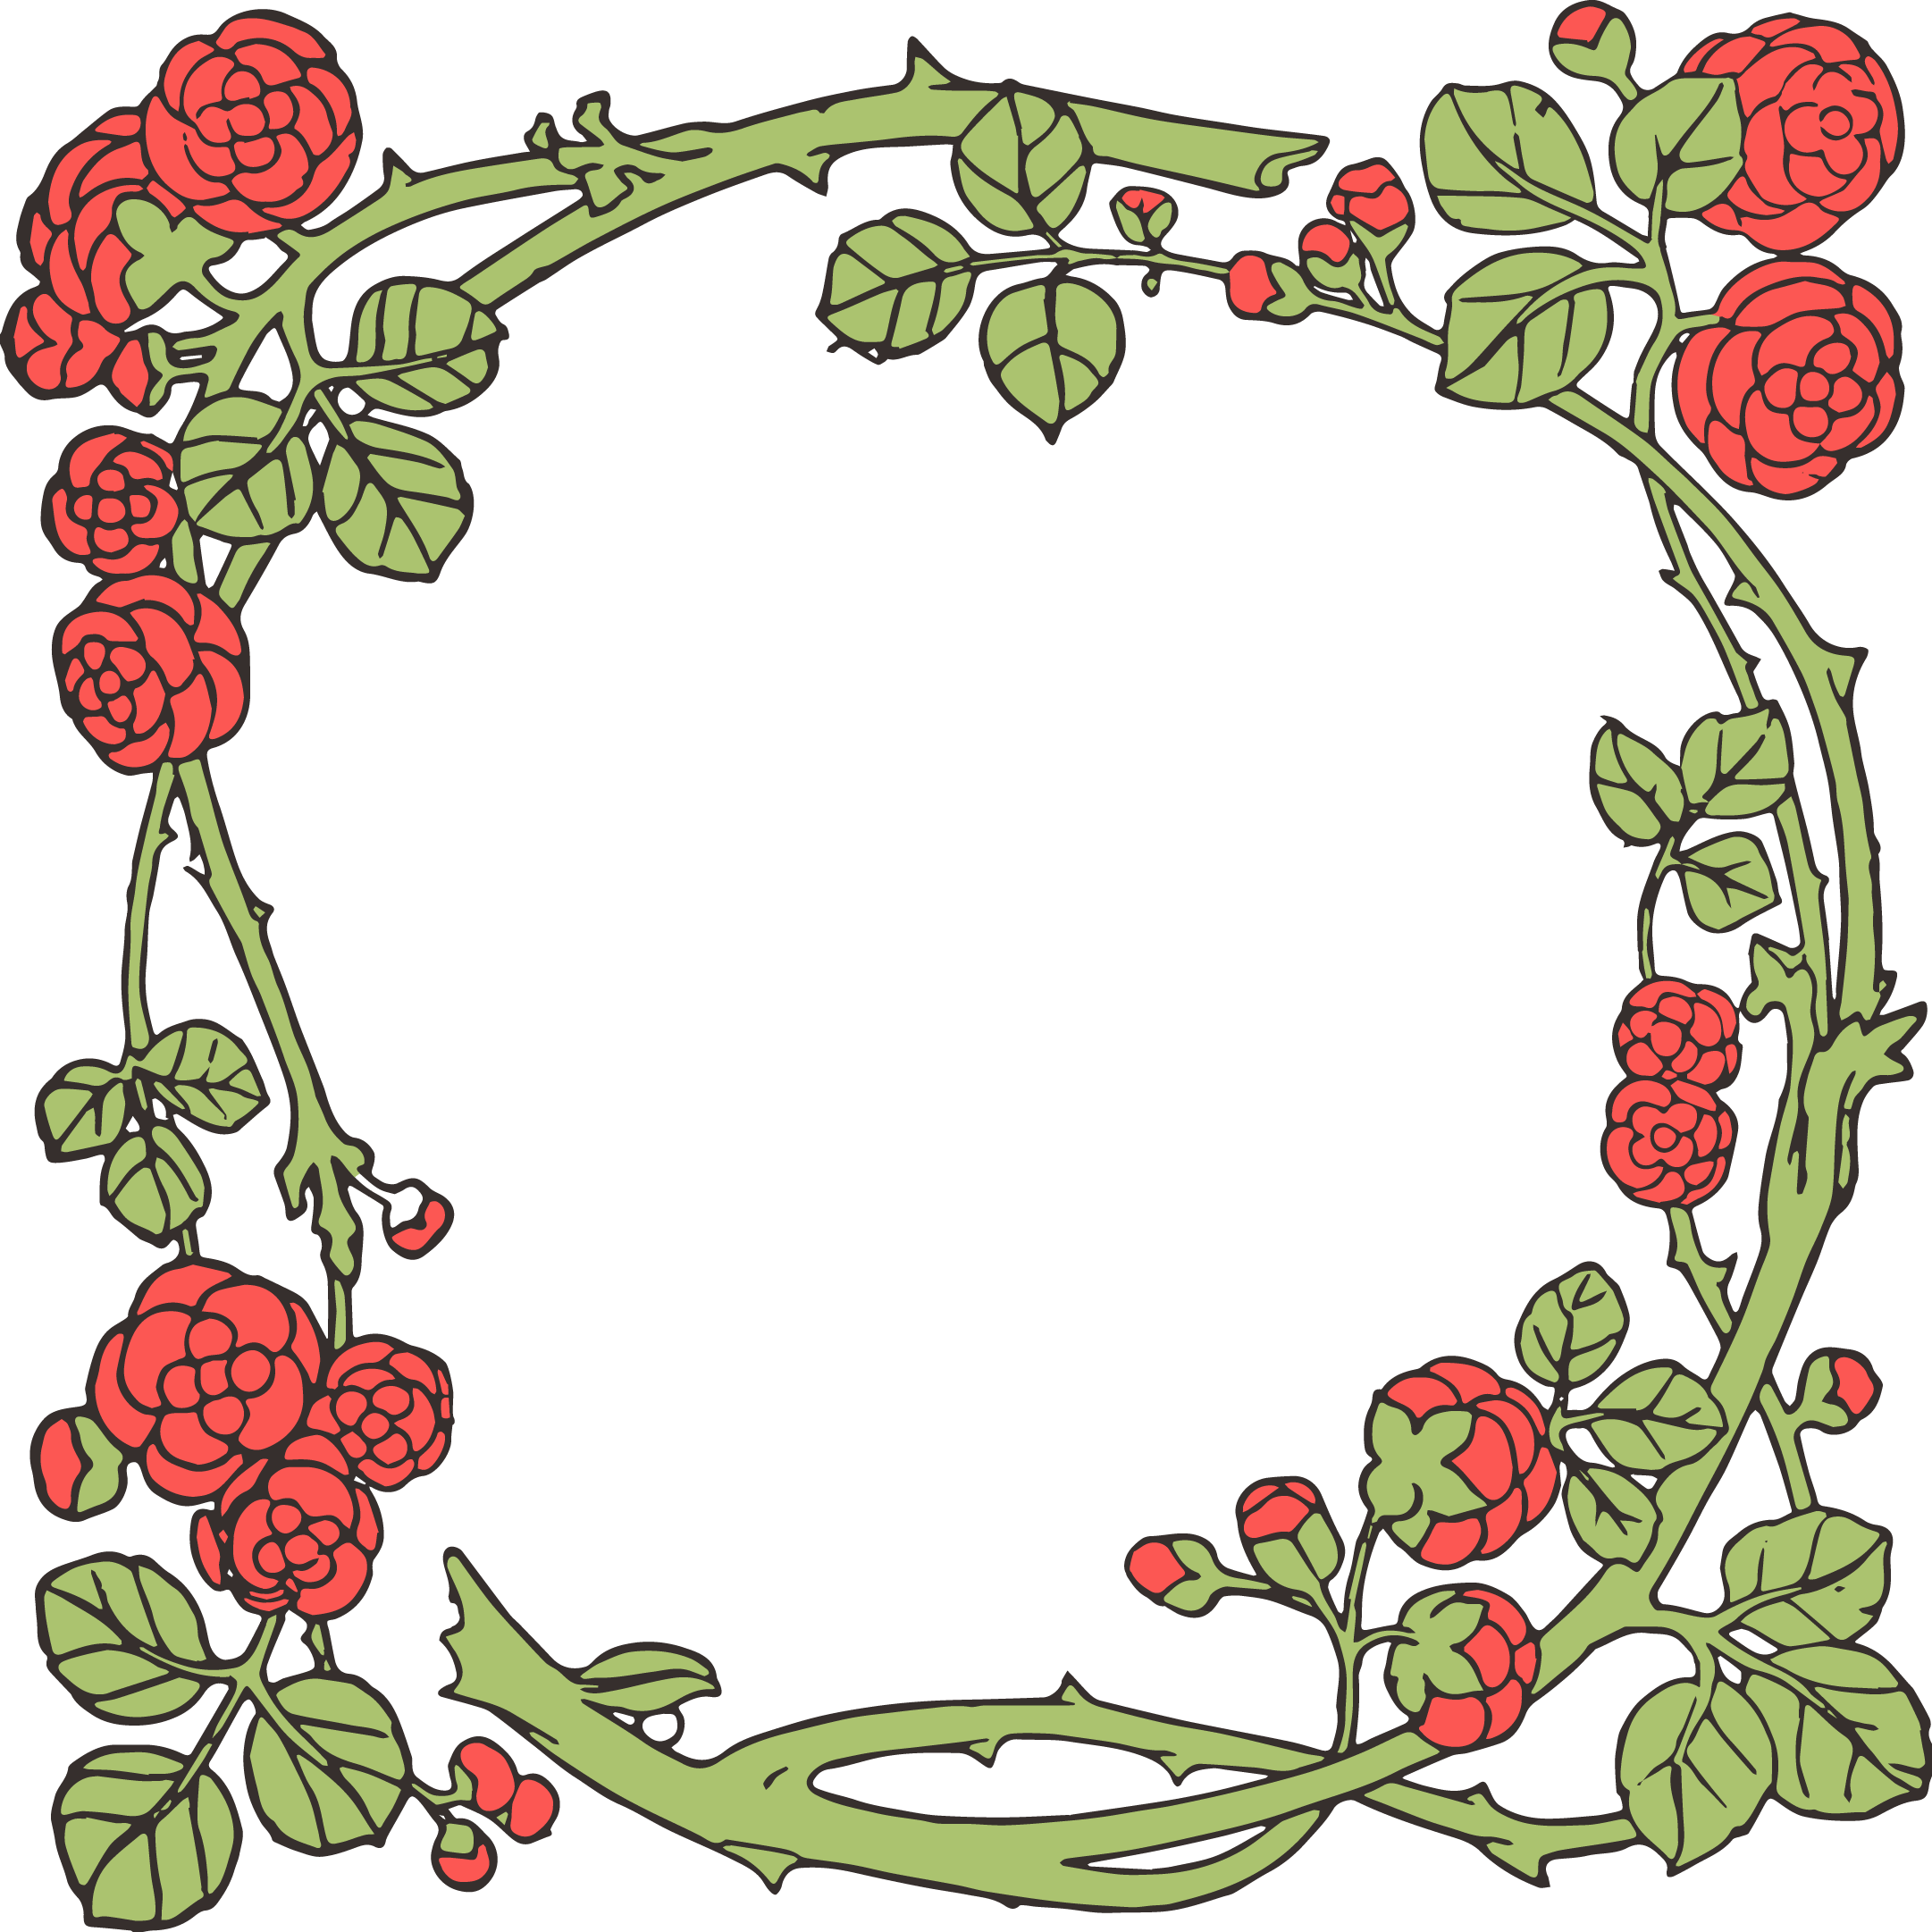 Free Stock Images - Vintage Rose Vector & Clip Art | Oh So Nifty ...